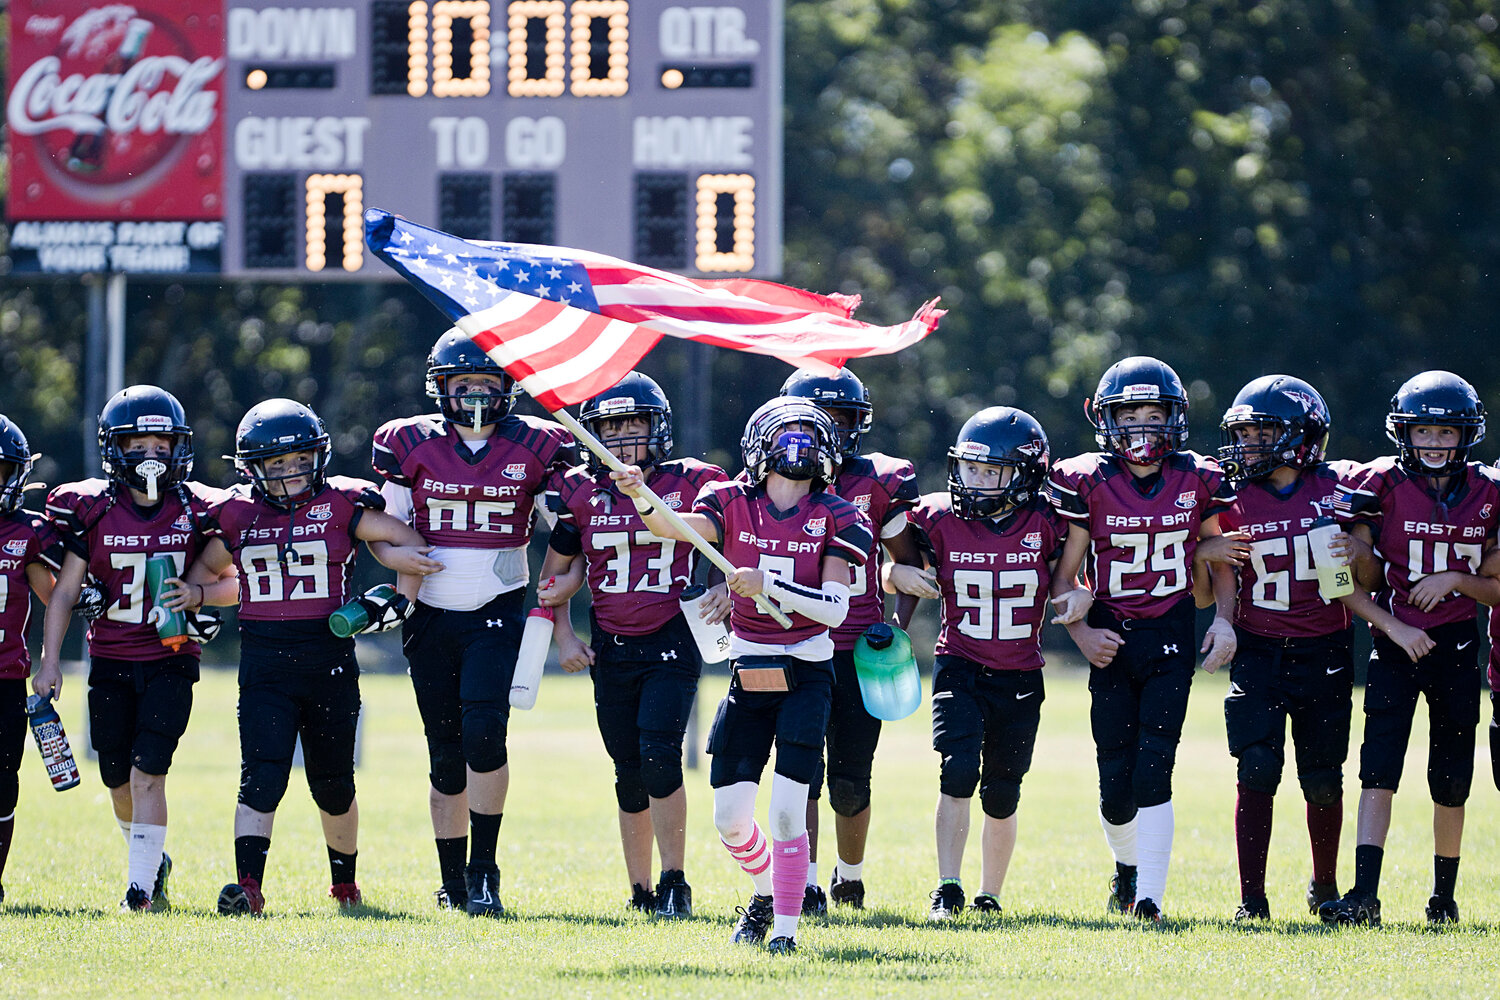 The 10U team takes the field before their home opener match against New Bedford. 